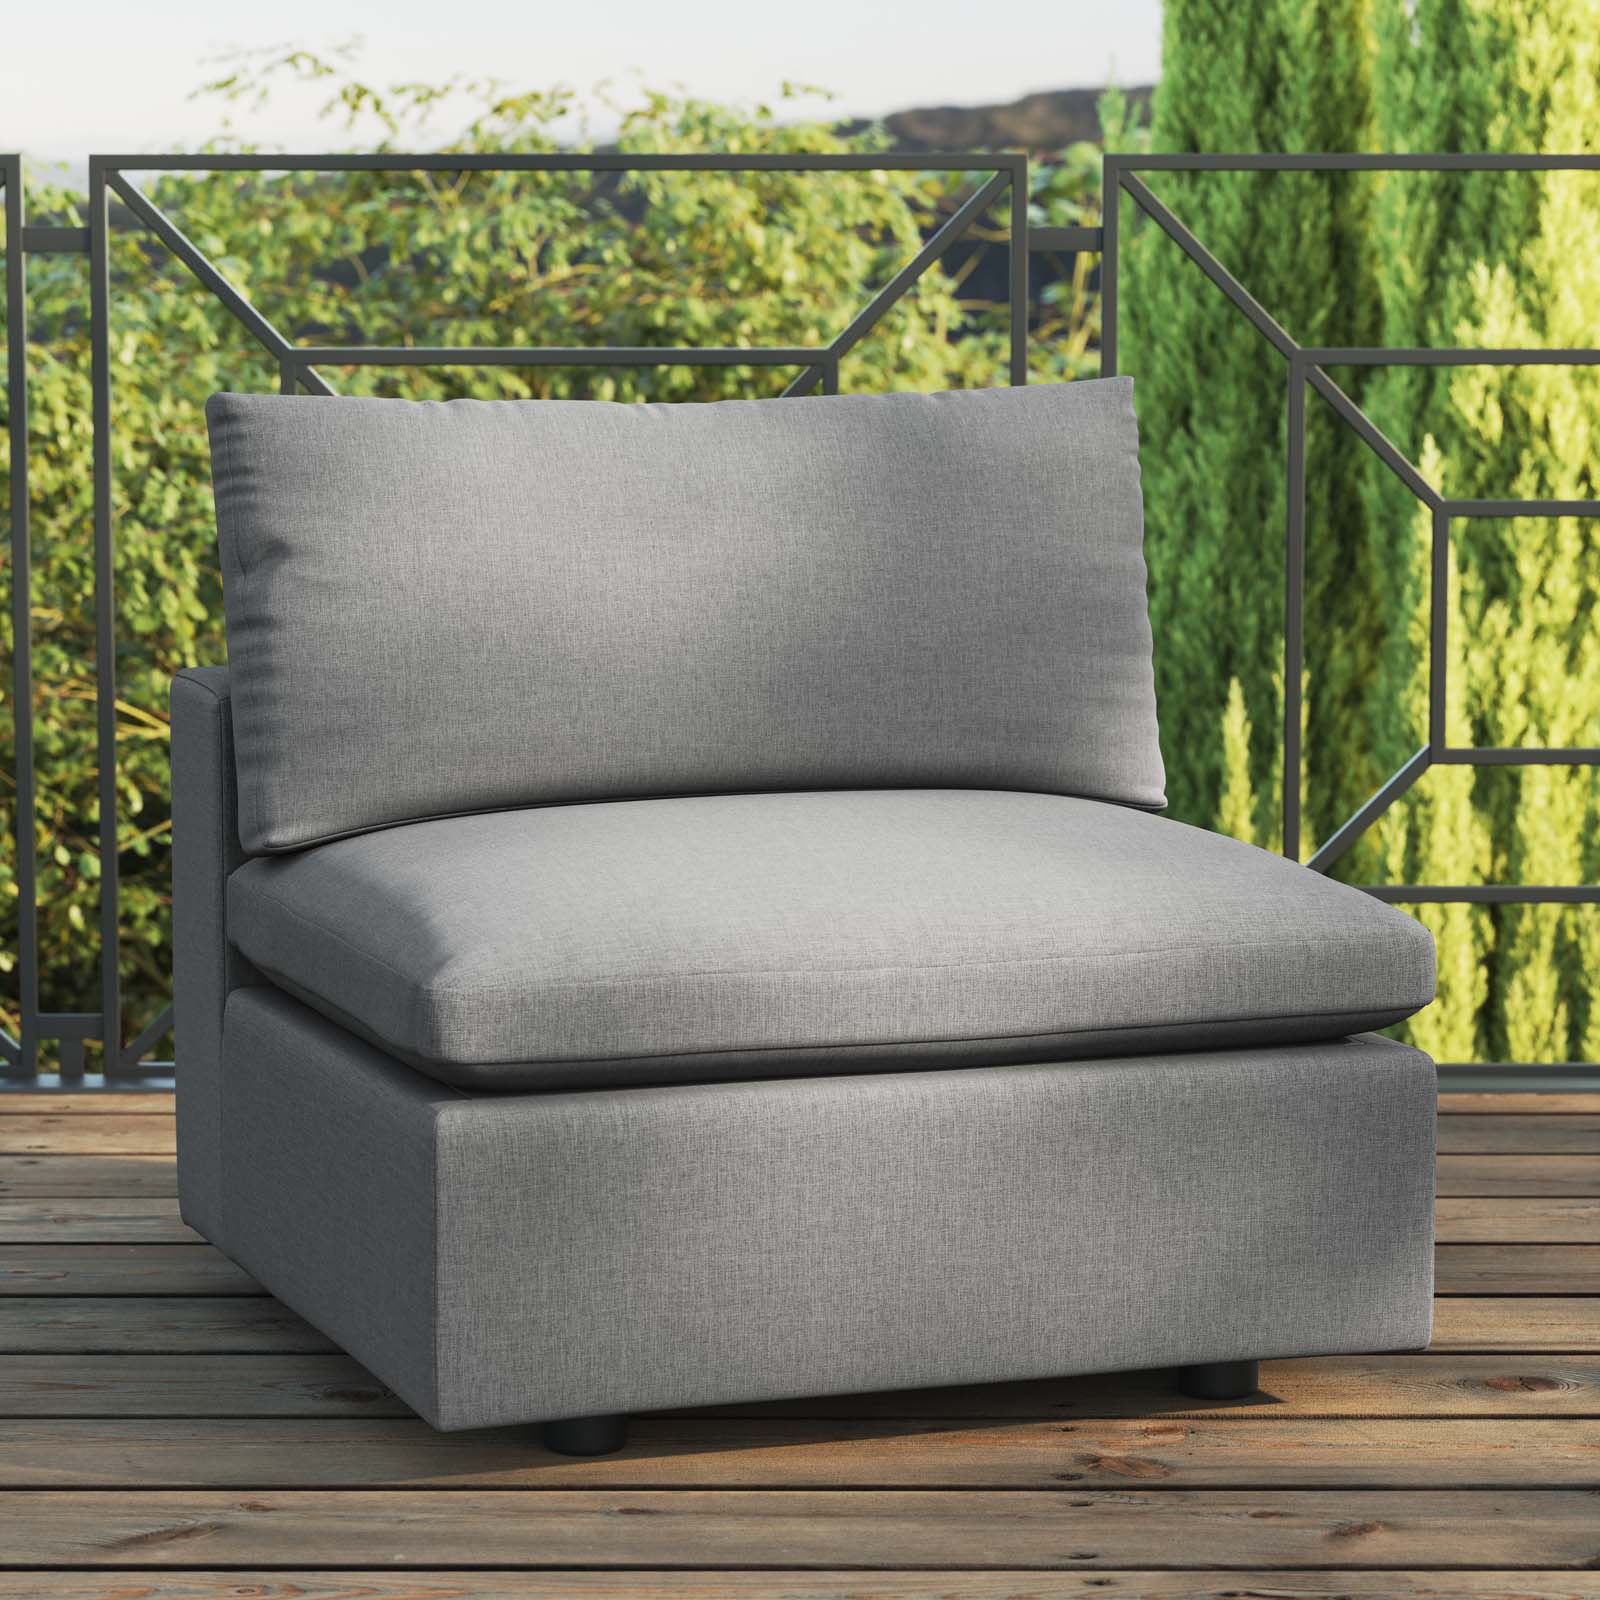 Commix Overstuffed Outdoor Patio Armless Chair - East Shore Modern Home Furnishings